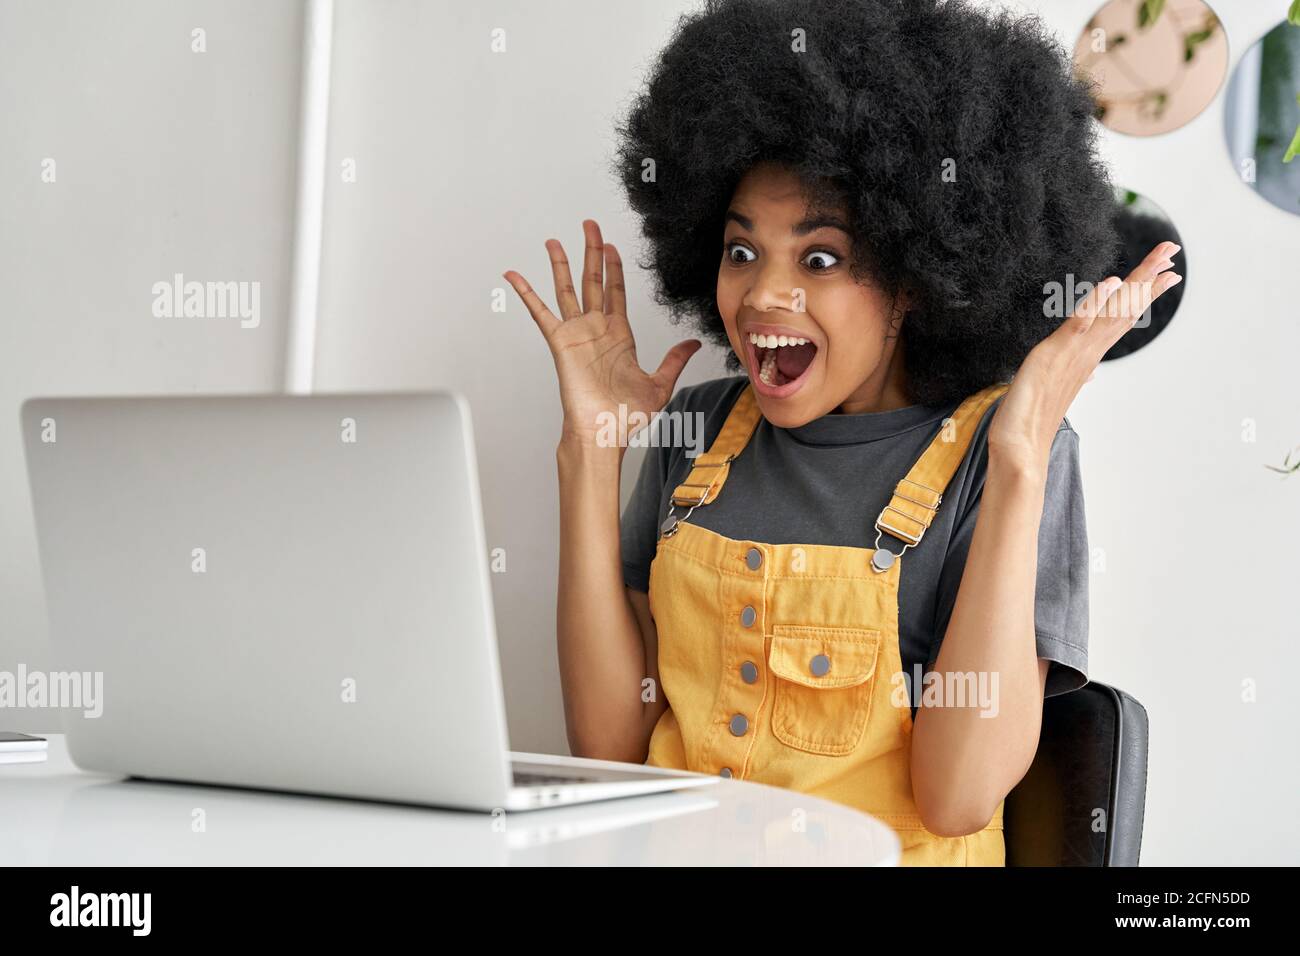 Excited African woman looking at laptop winning online, reading great news. Stock Photo